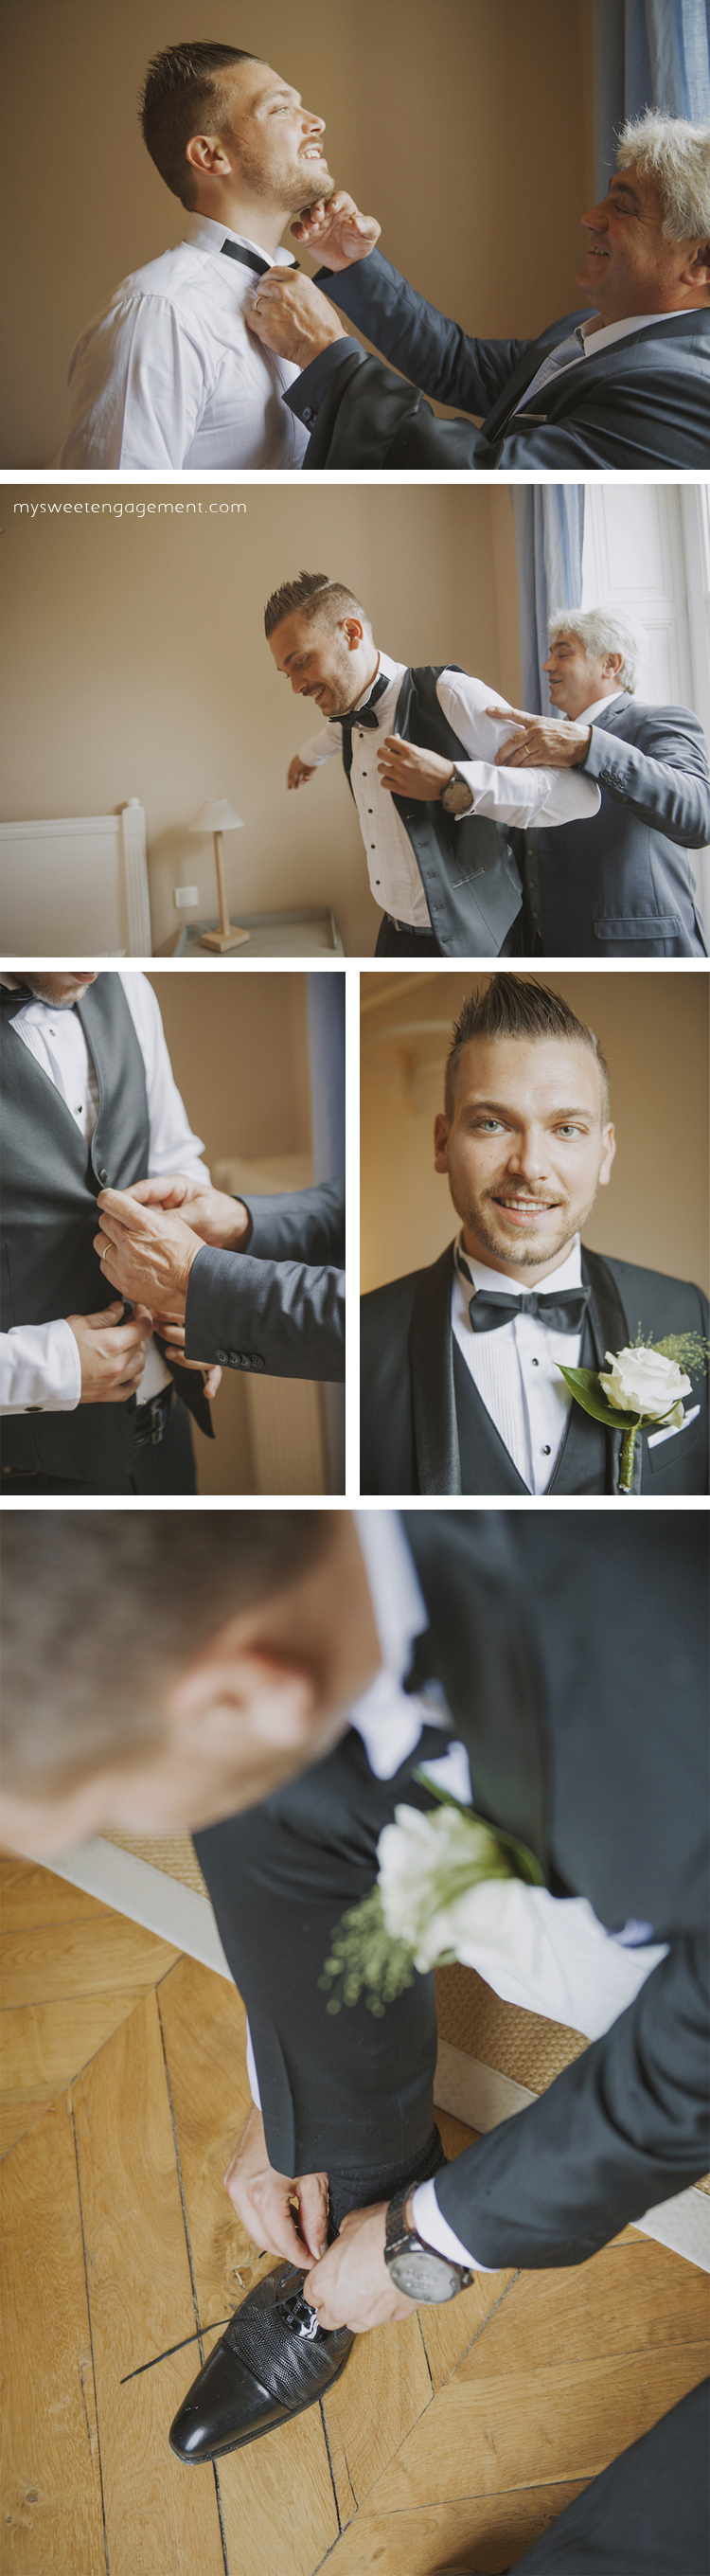 groom and his dad getting ready - bow tie - boutonniere - man vest and suit - groom's shoes - wedding blog - my sweet engagement